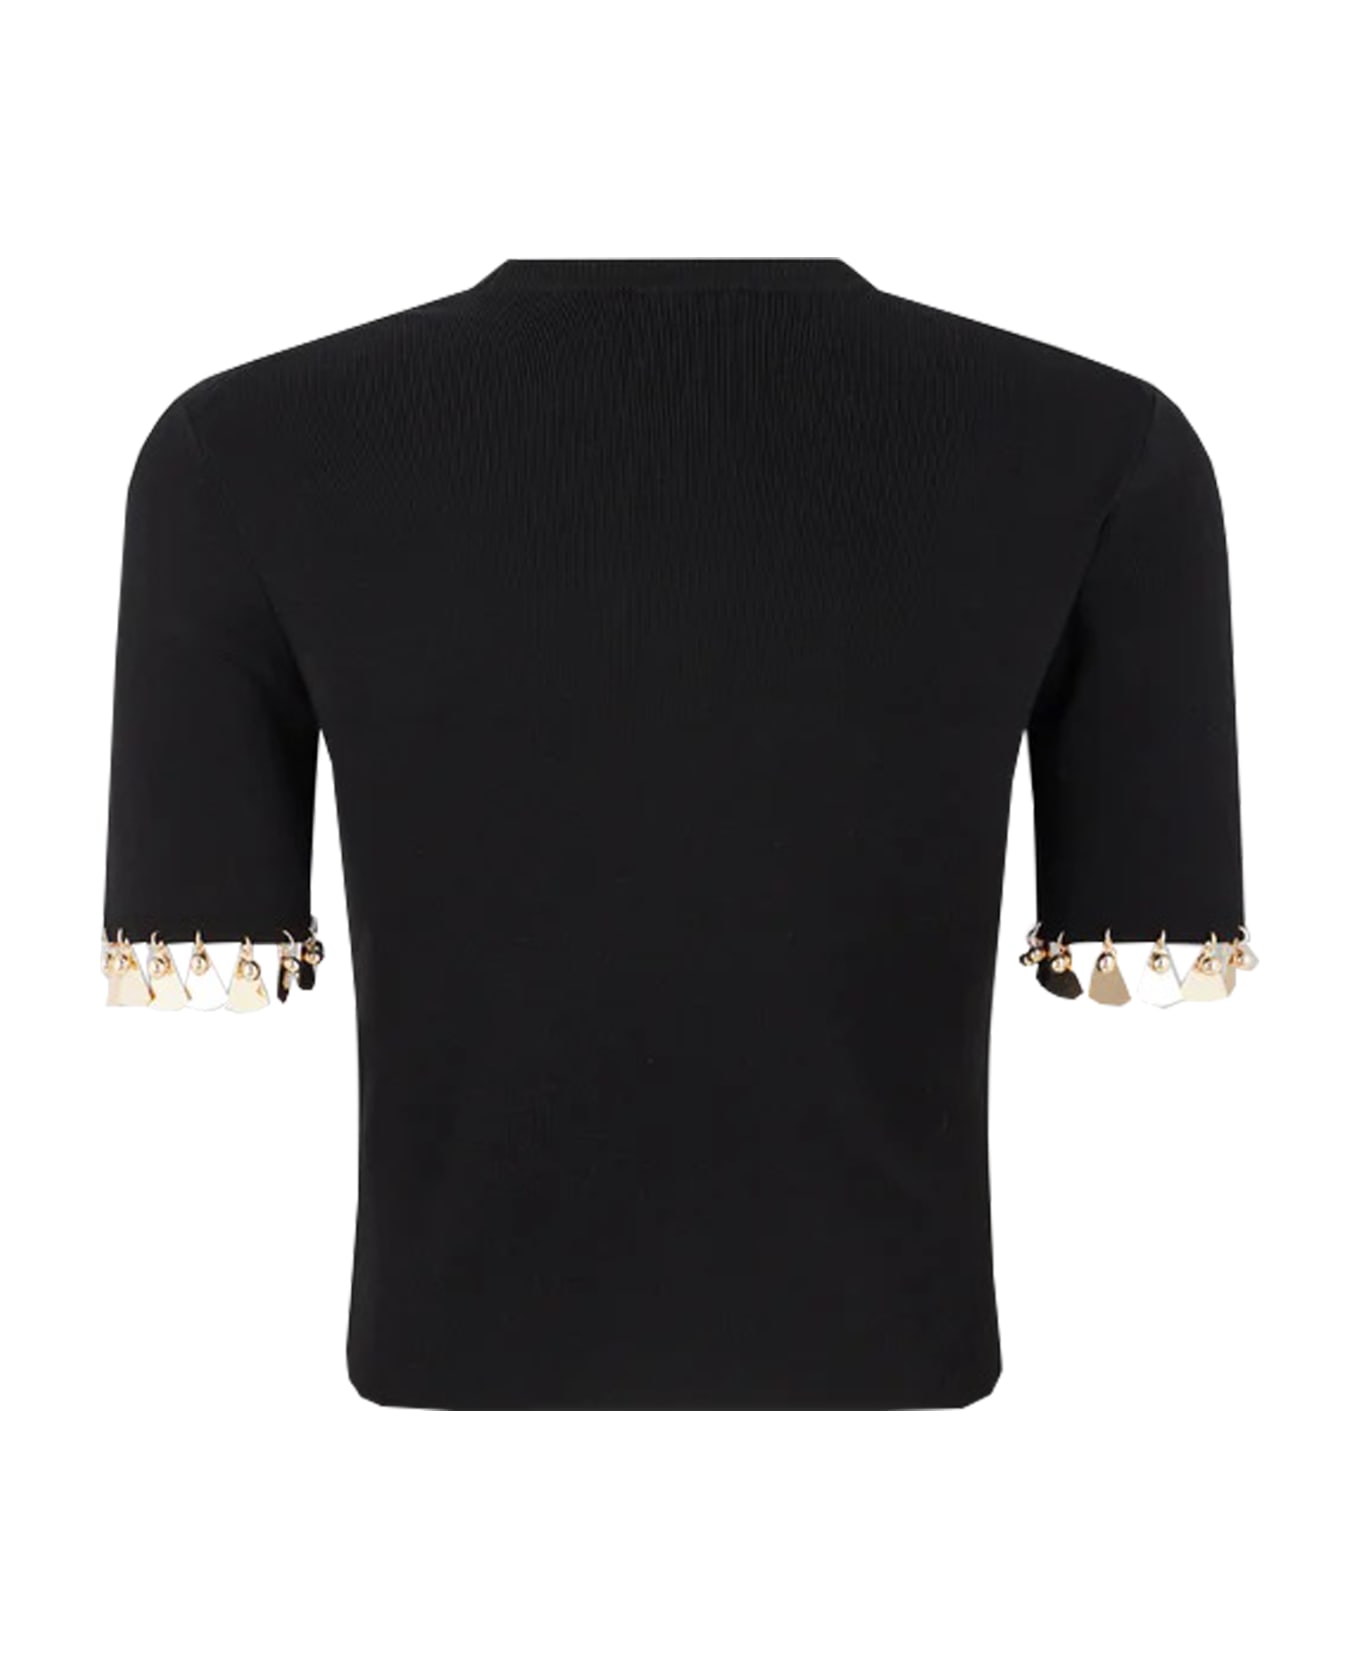 Paco Rabanne Embellished Knit Cropped Top - Black Tシャツ